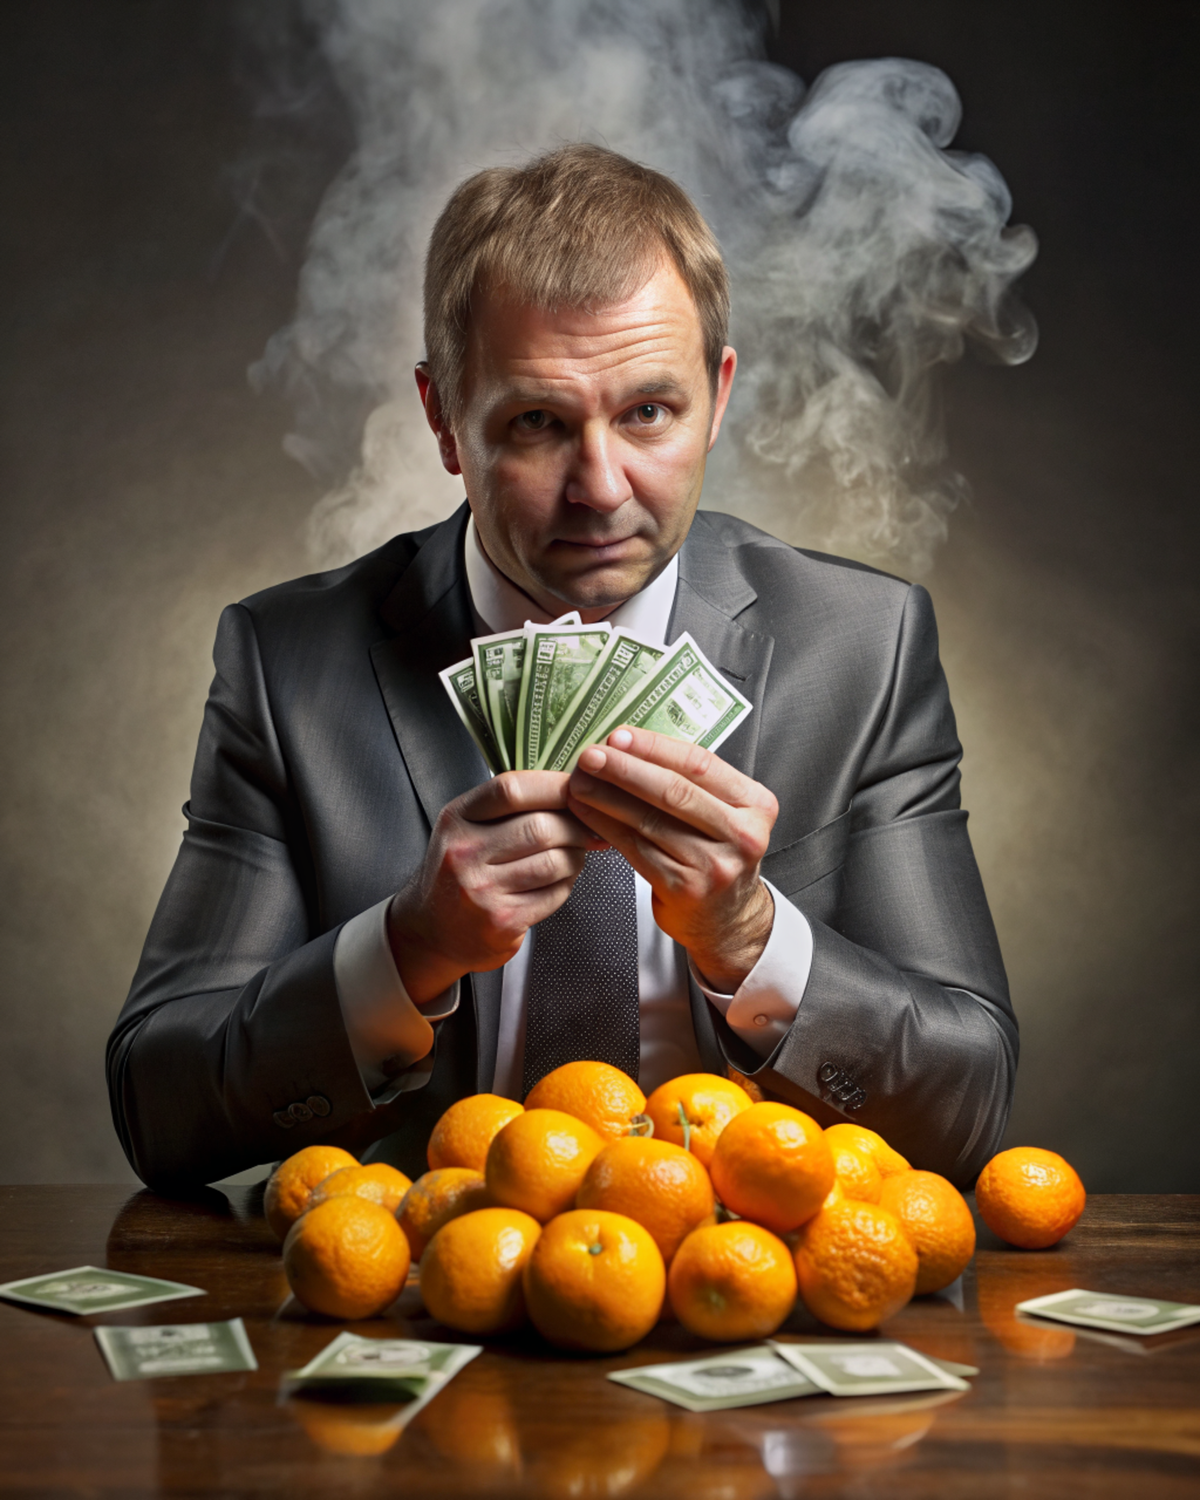 Can You Smell Oranges and Become a Millionaire?